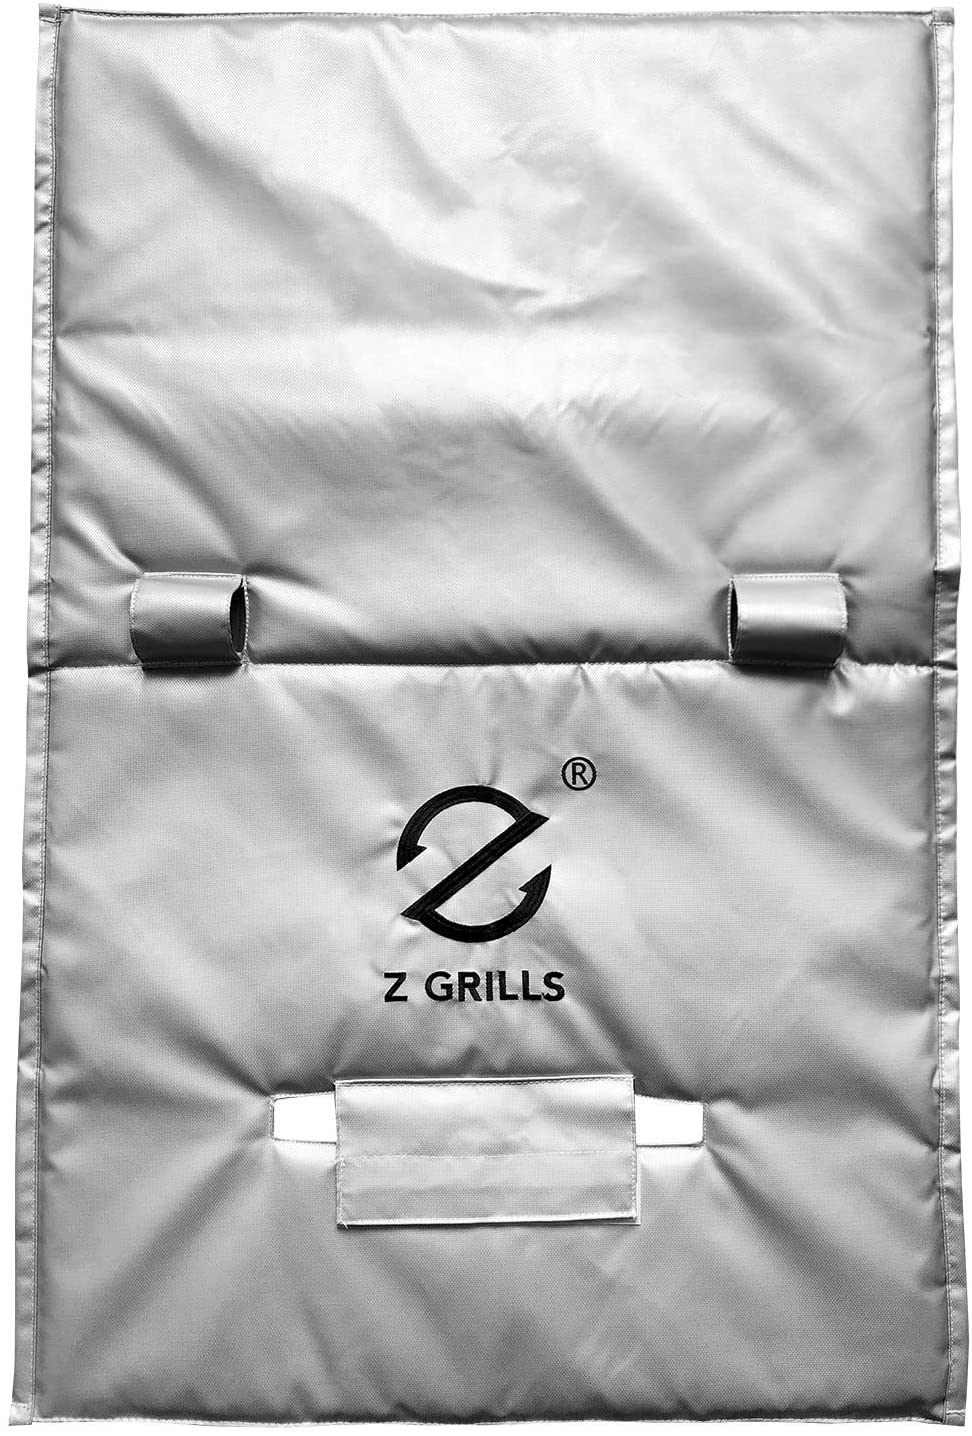 Z GRILLS Thermal Blanket for ZPG 450A -Keep Consistent temperatures & Save Pellet-Enjoy BBQ All Year Round Even Cold Winter - image 4 of 7